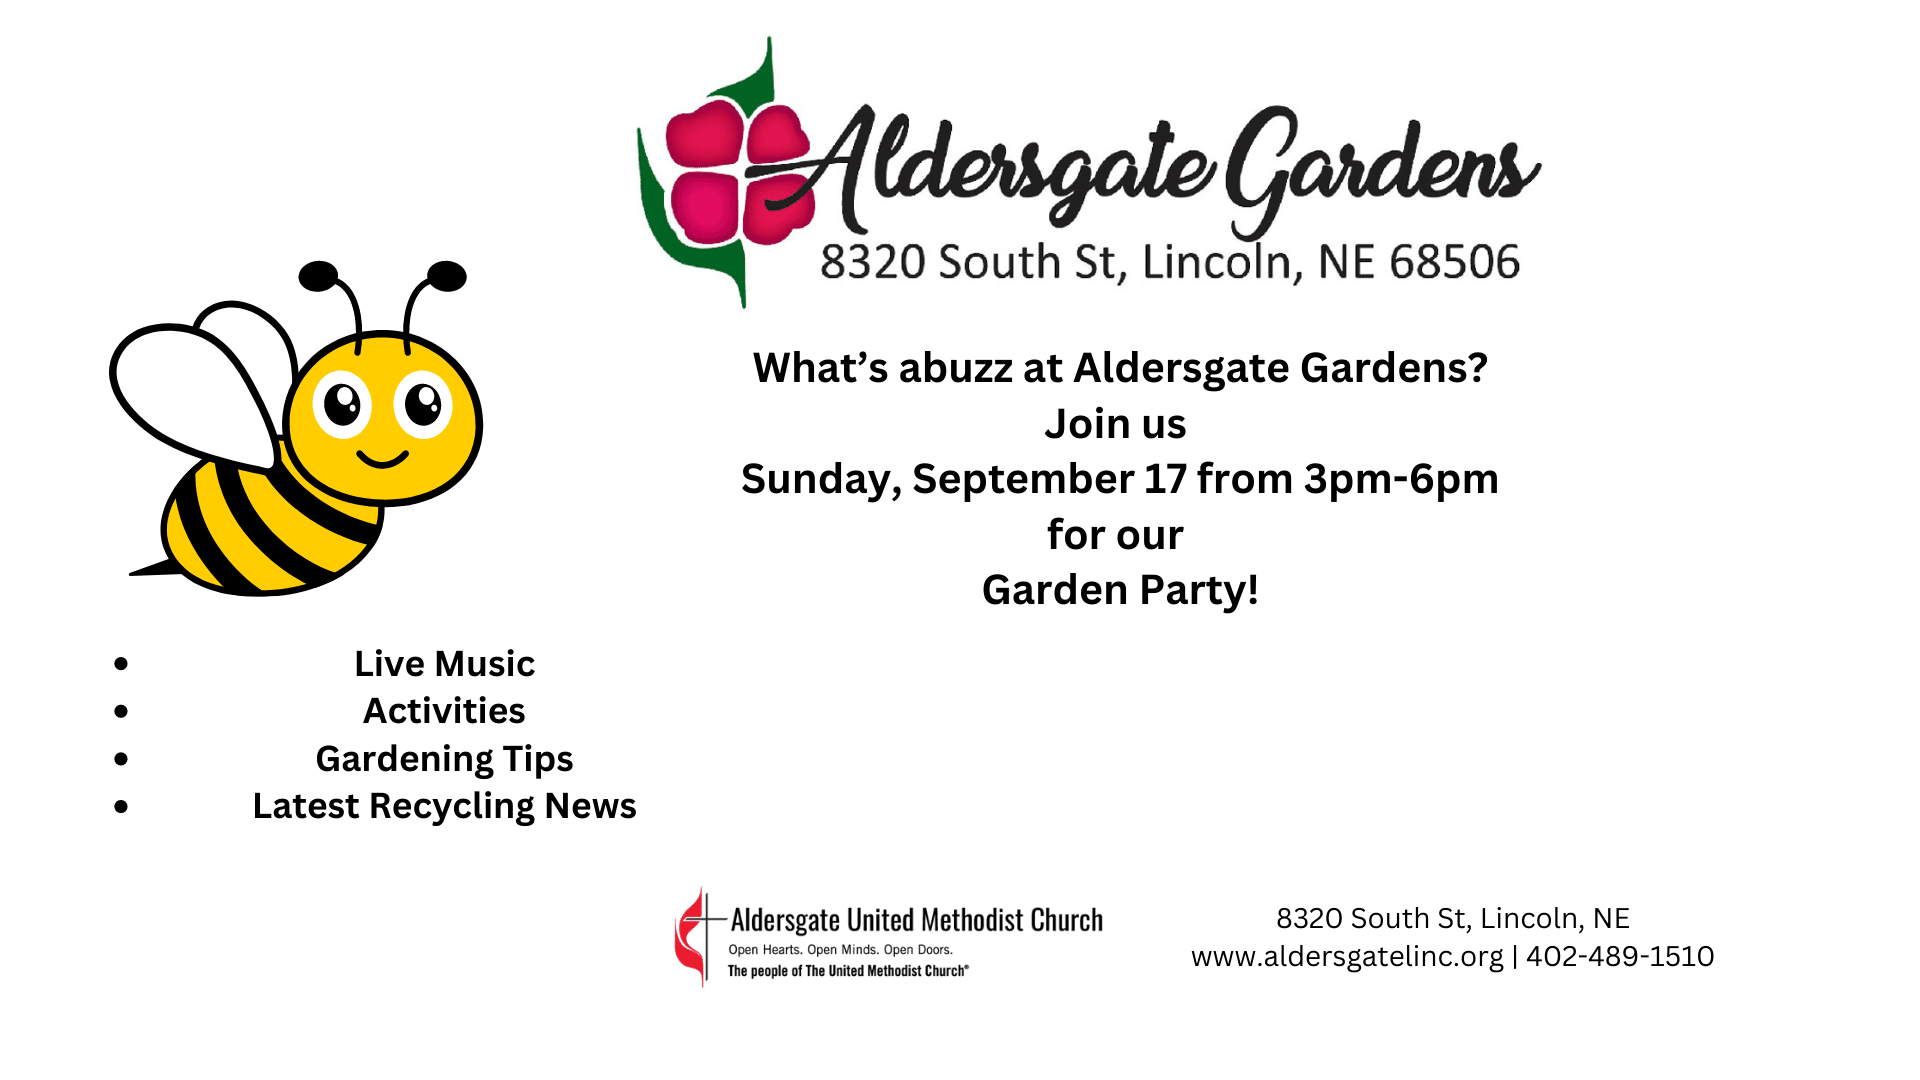 Aldersgate Gardens invites you to our annual Garden Party, Sunday, September 17, 3:00 p.m. - 6:00 p.m.